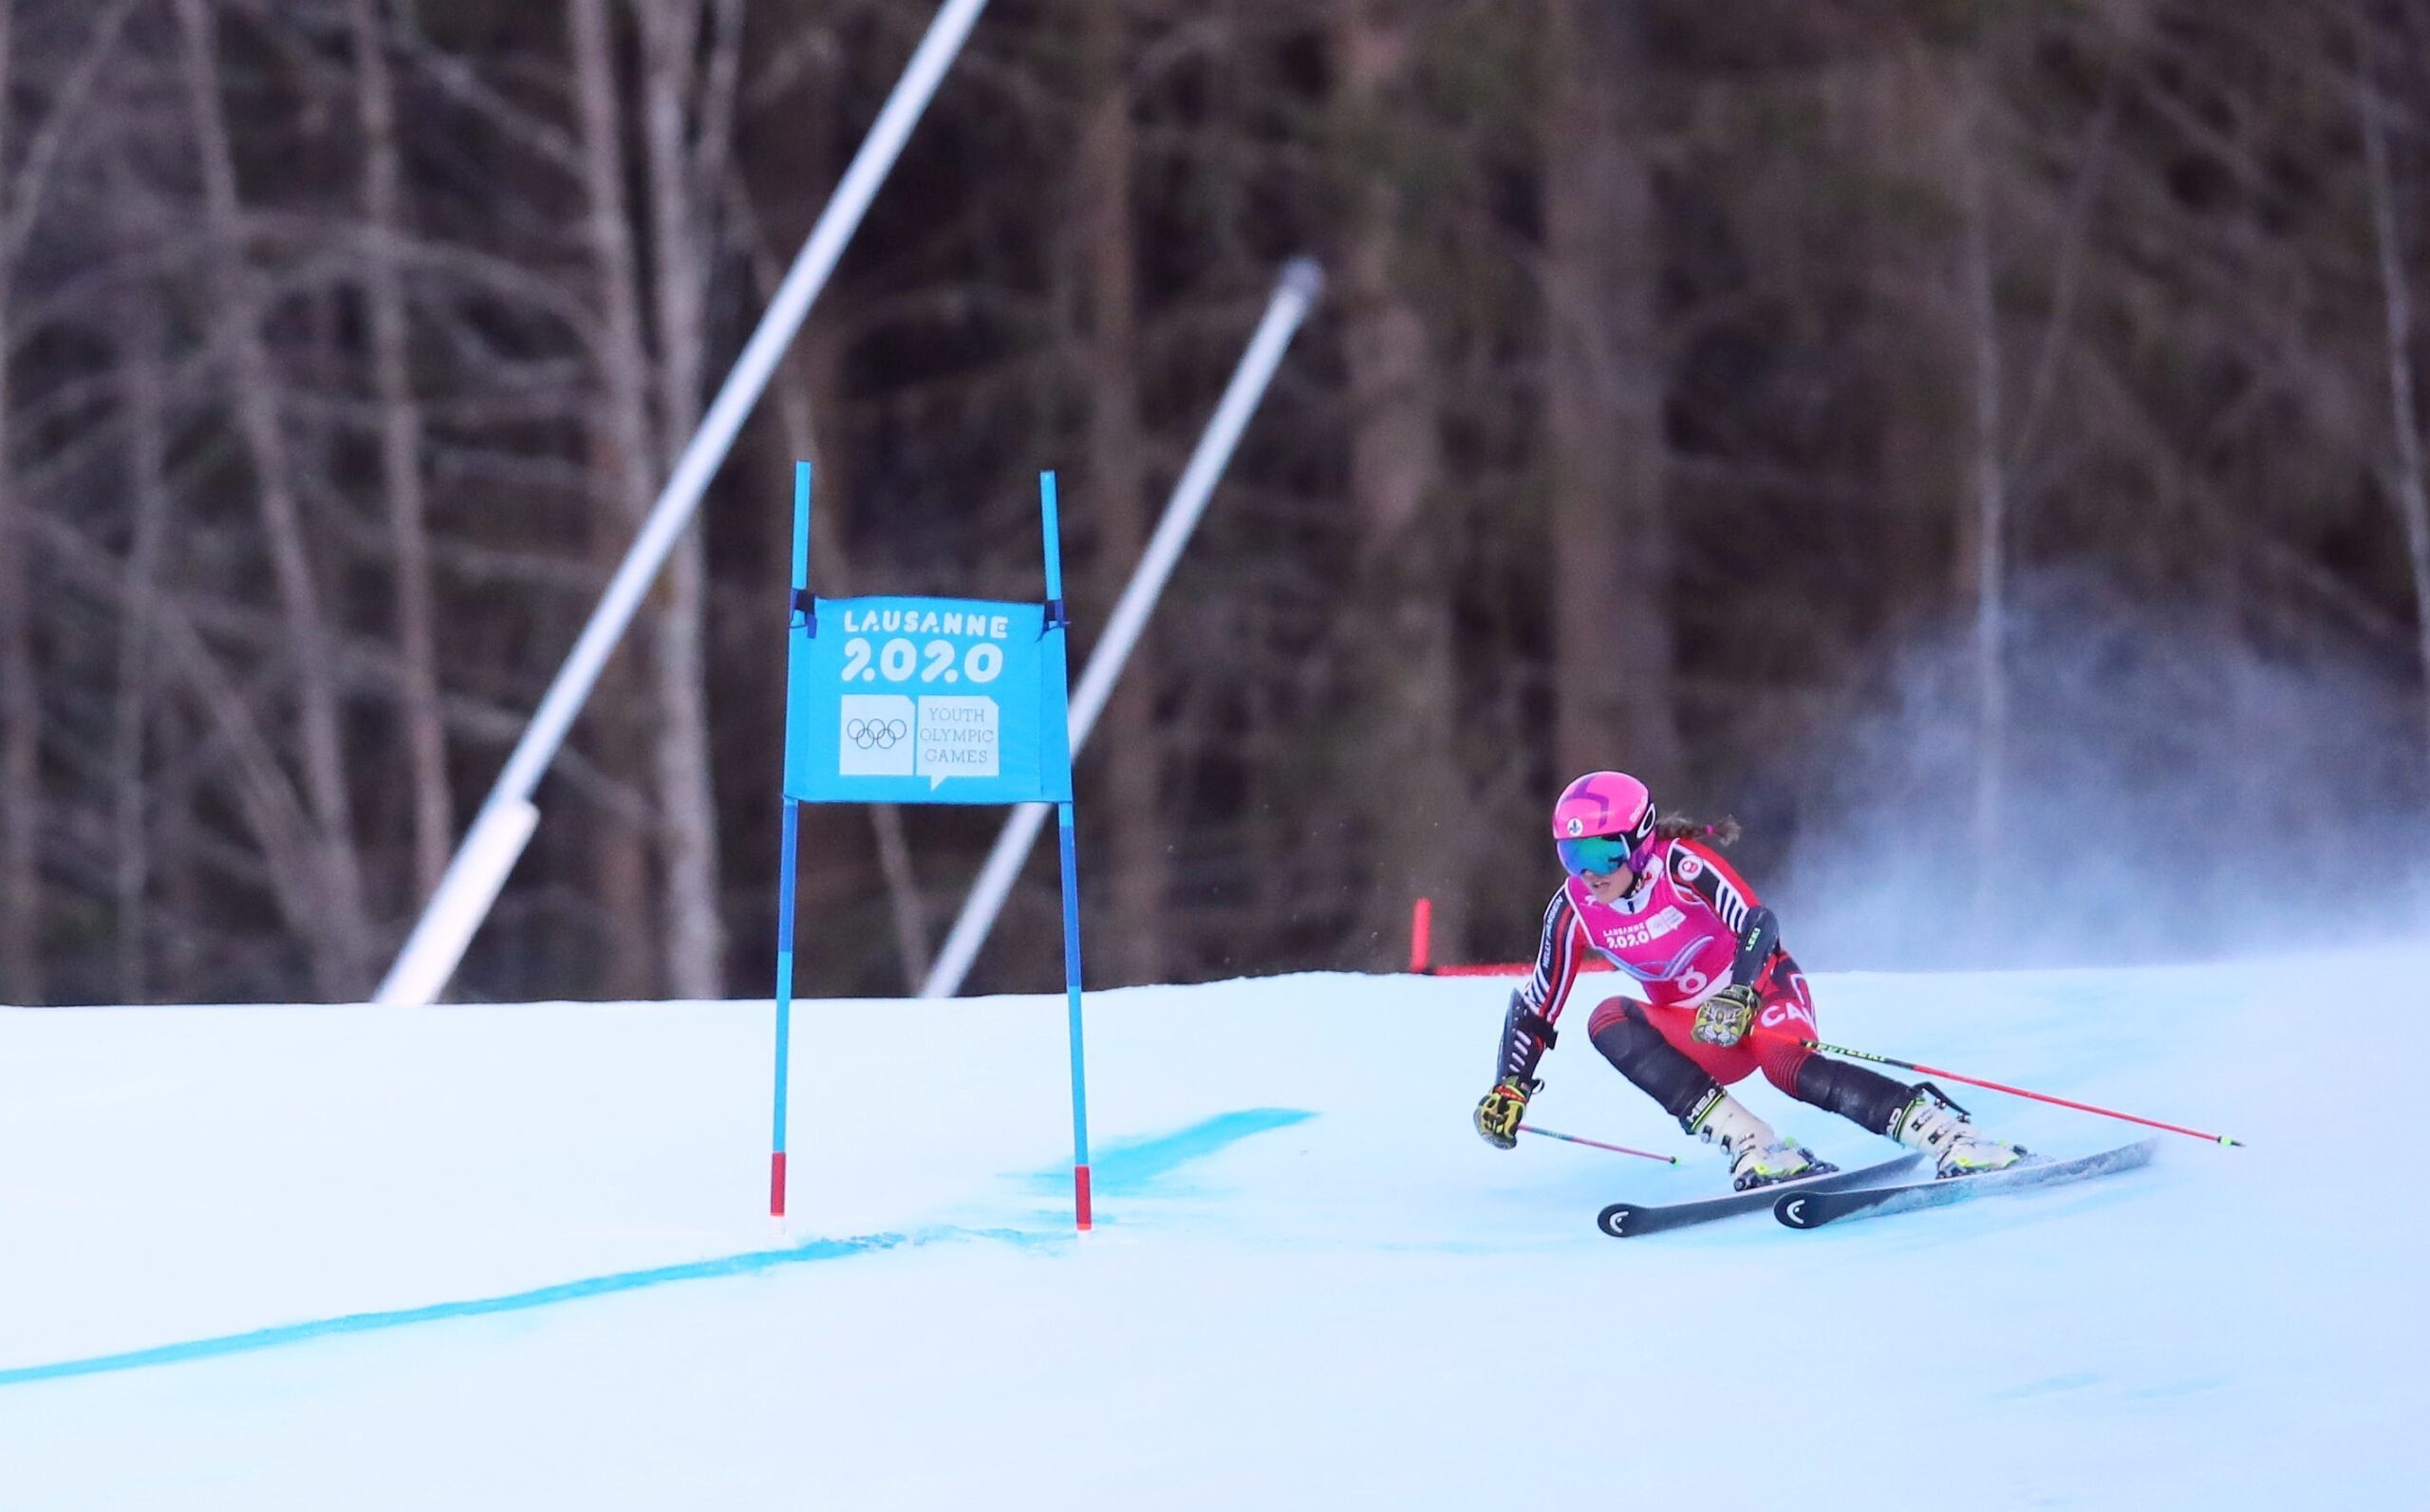 Woman's Alpine Skiing Competition At The Winter Olympics